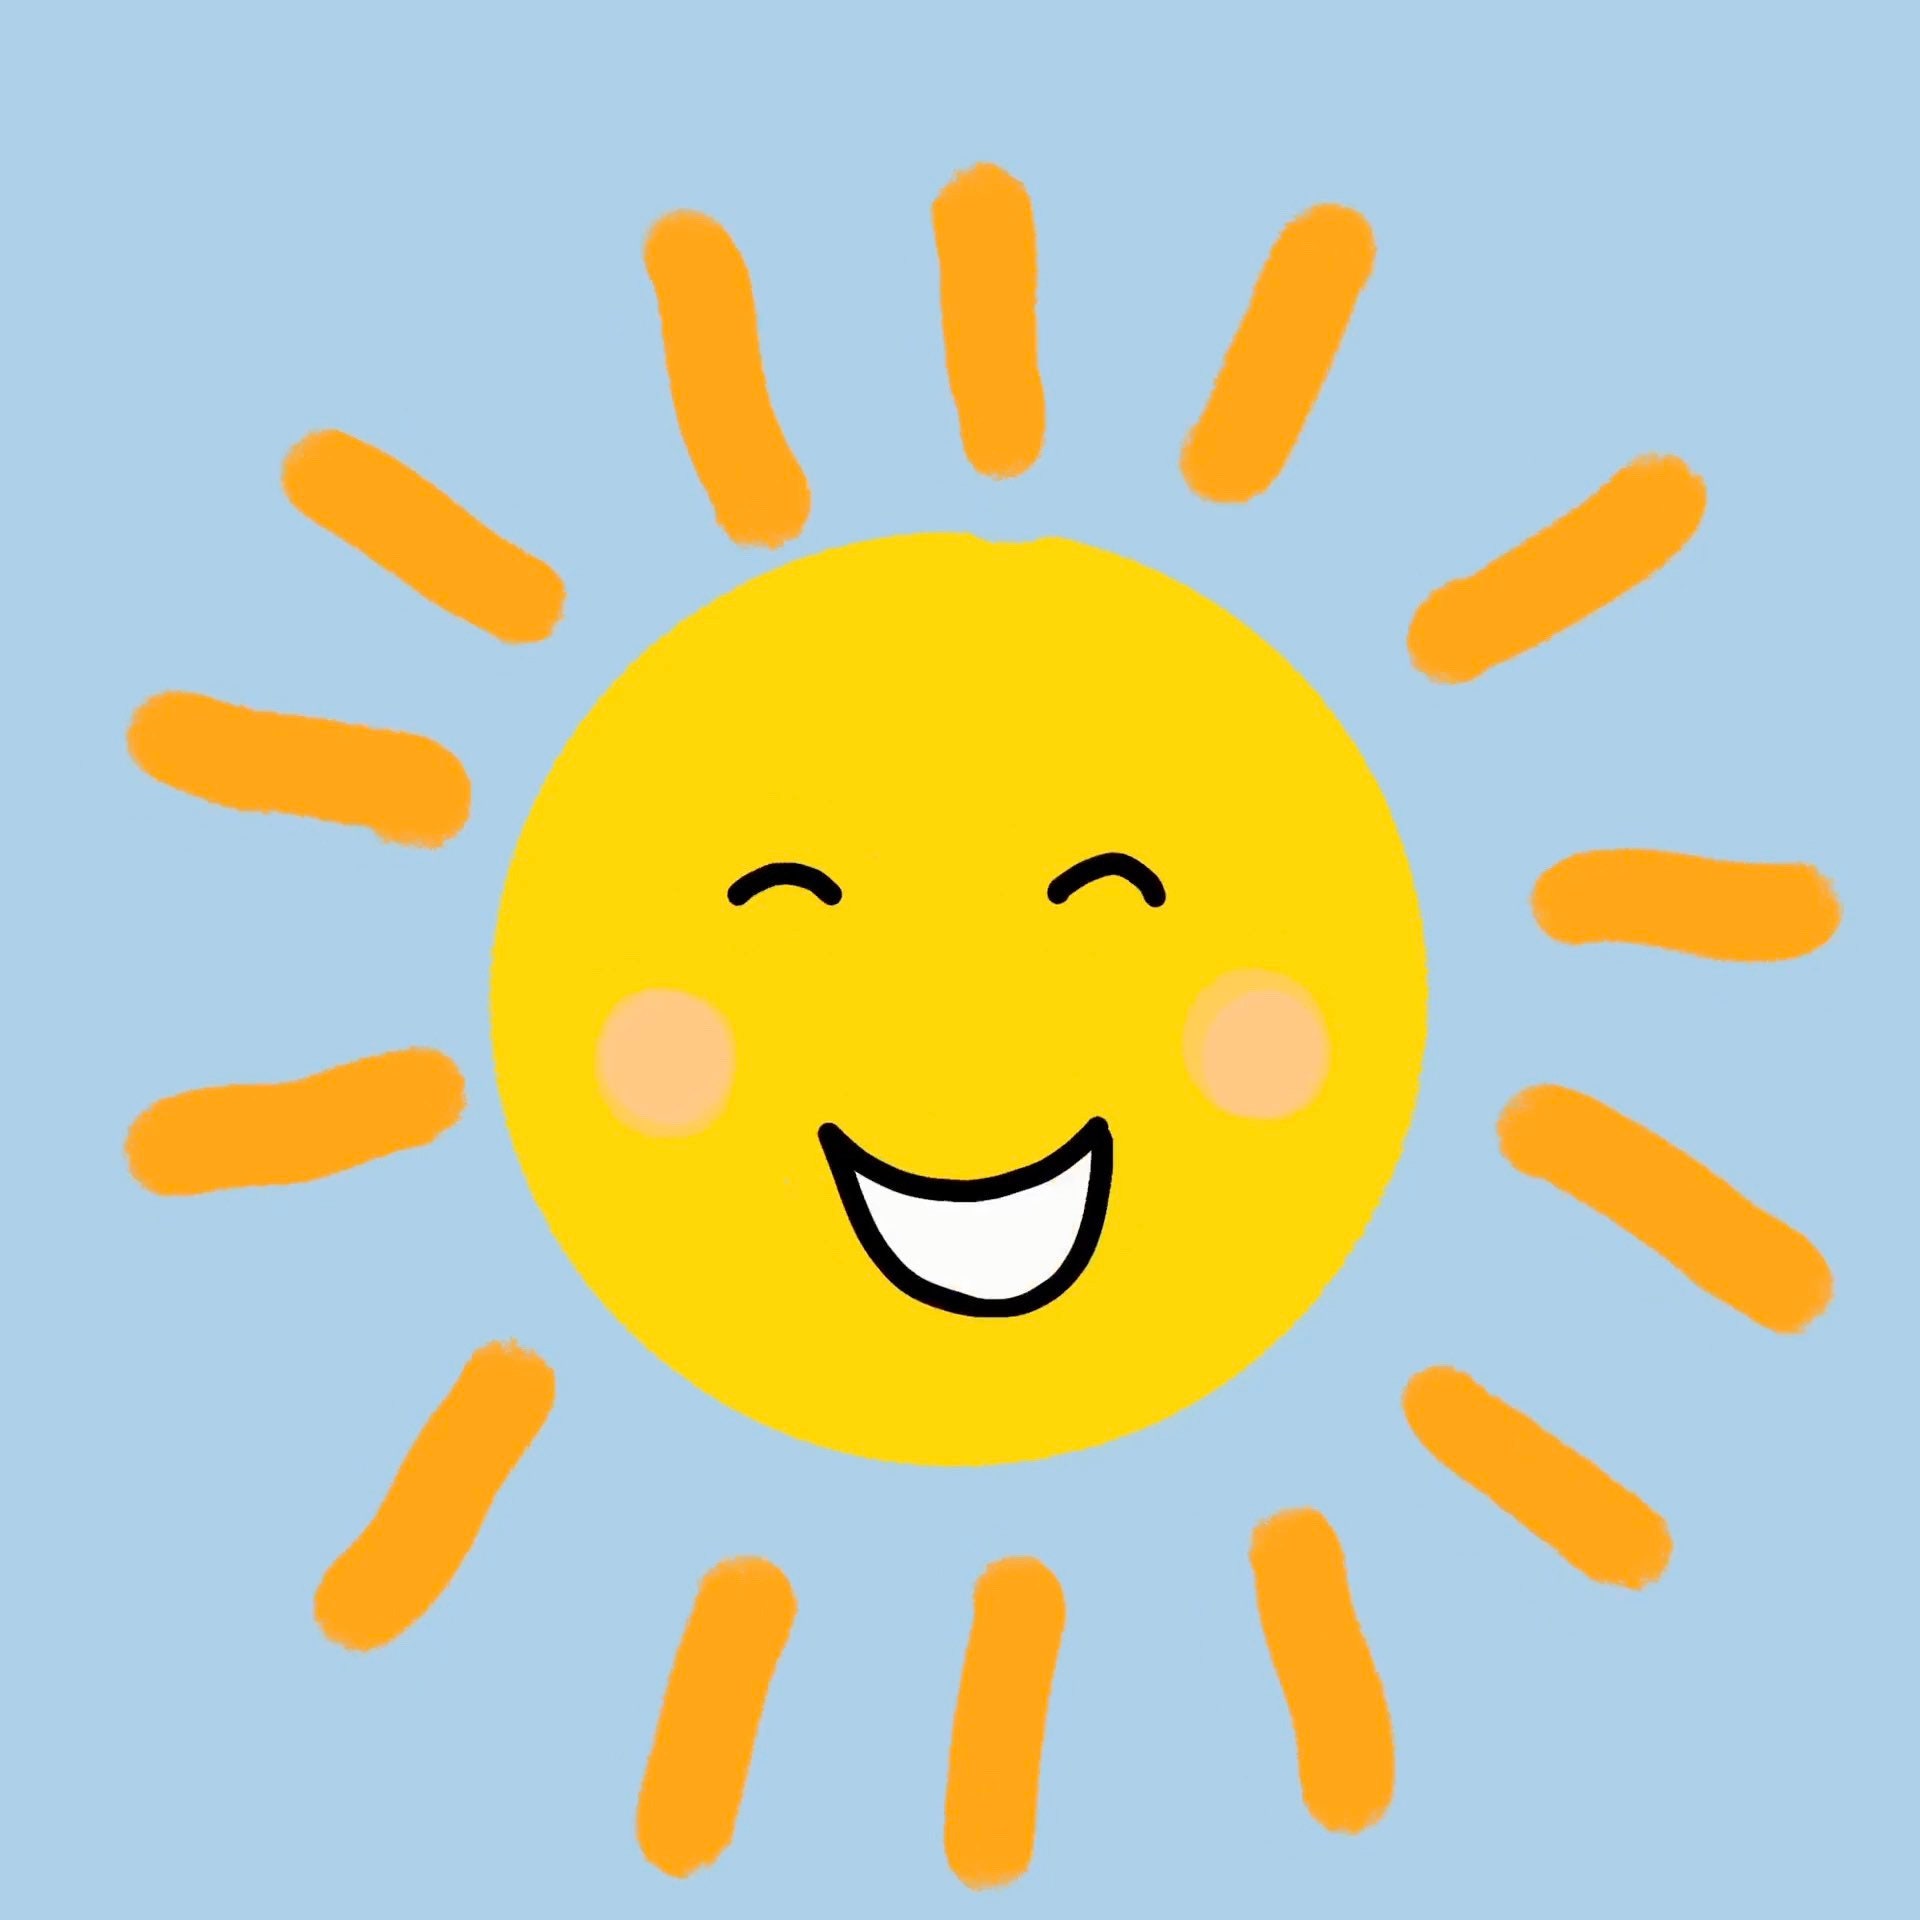 Cute Smiling Sun Watch Animation - Etsy